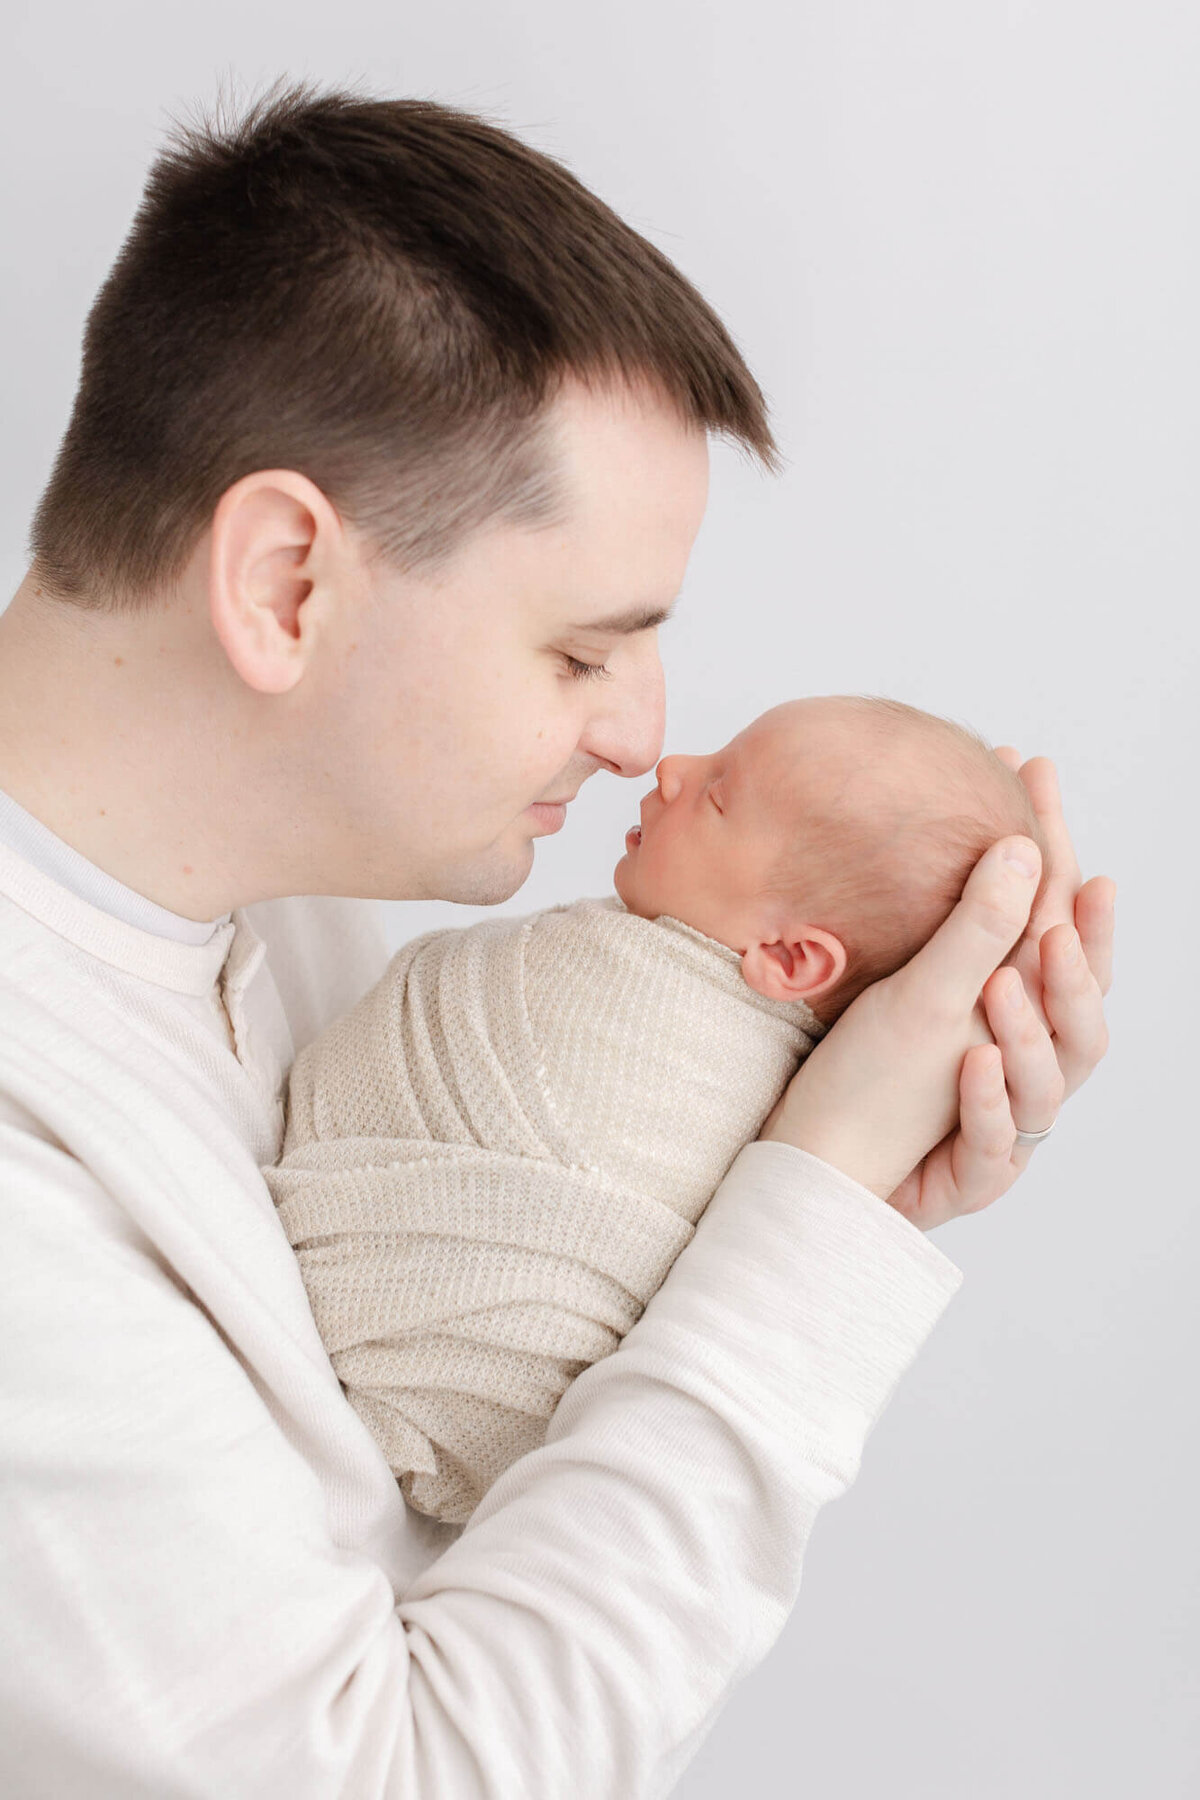 Daddy holding baby in his arms and touching noses together. Baby is sleeping peacefully. Dad is wearing a light cream shirt and baby is wrapped in a beige wrap. Image taken during newborn portrait studio in minimalist newborn photography studio. Photo taken by Ashlie Behm Photography